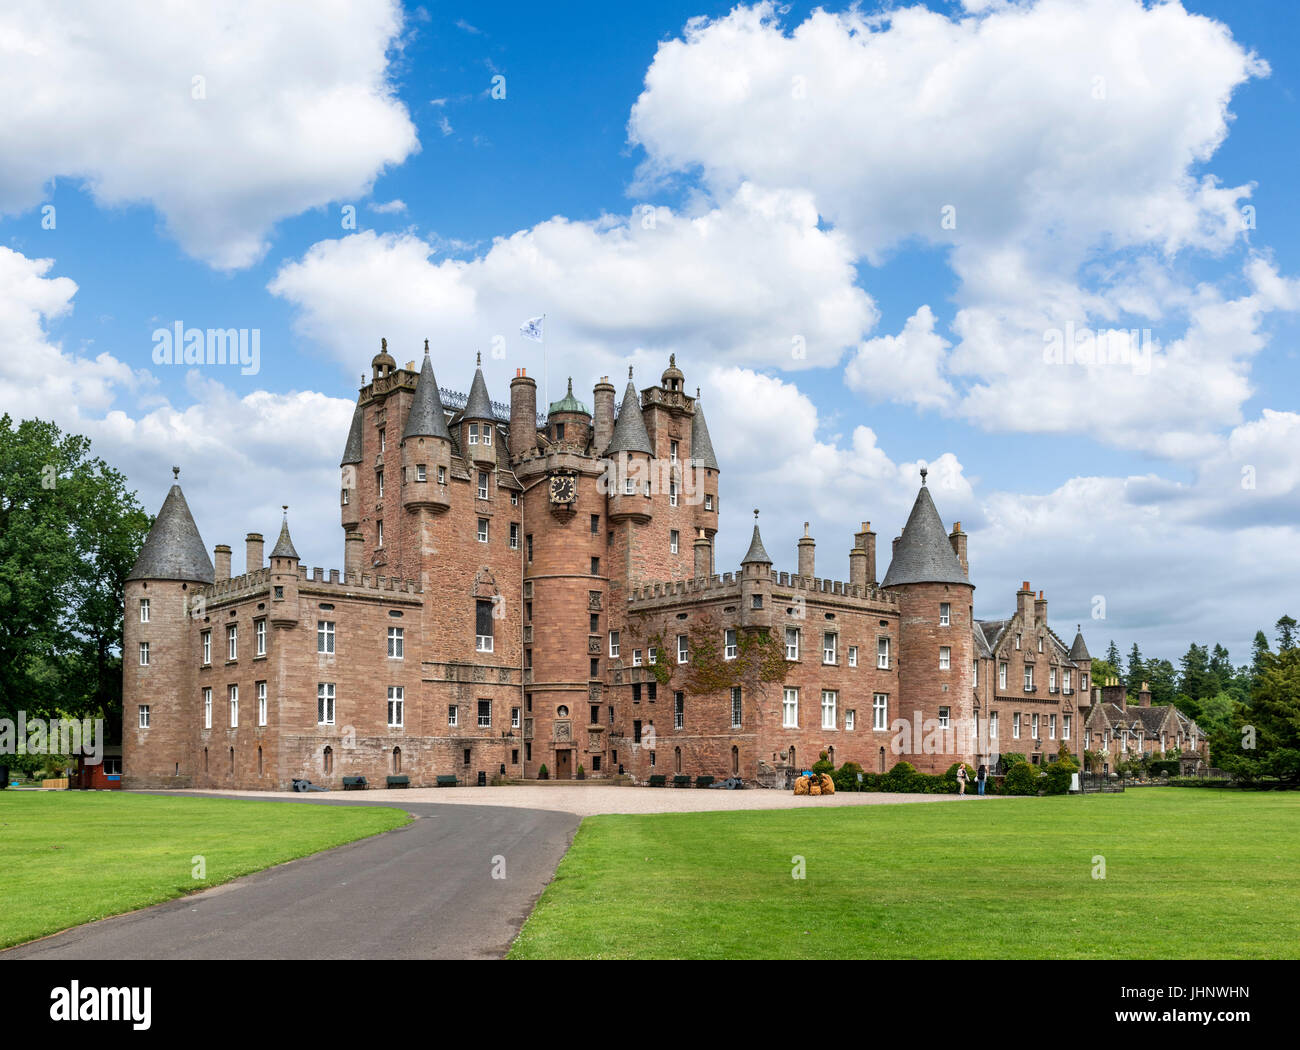 Glamis Castle, family home of of Elizabeth Bowes-Lyon (Queen Elizabeth the Queen Mother), Angus, Scotland, UK Stock Photo